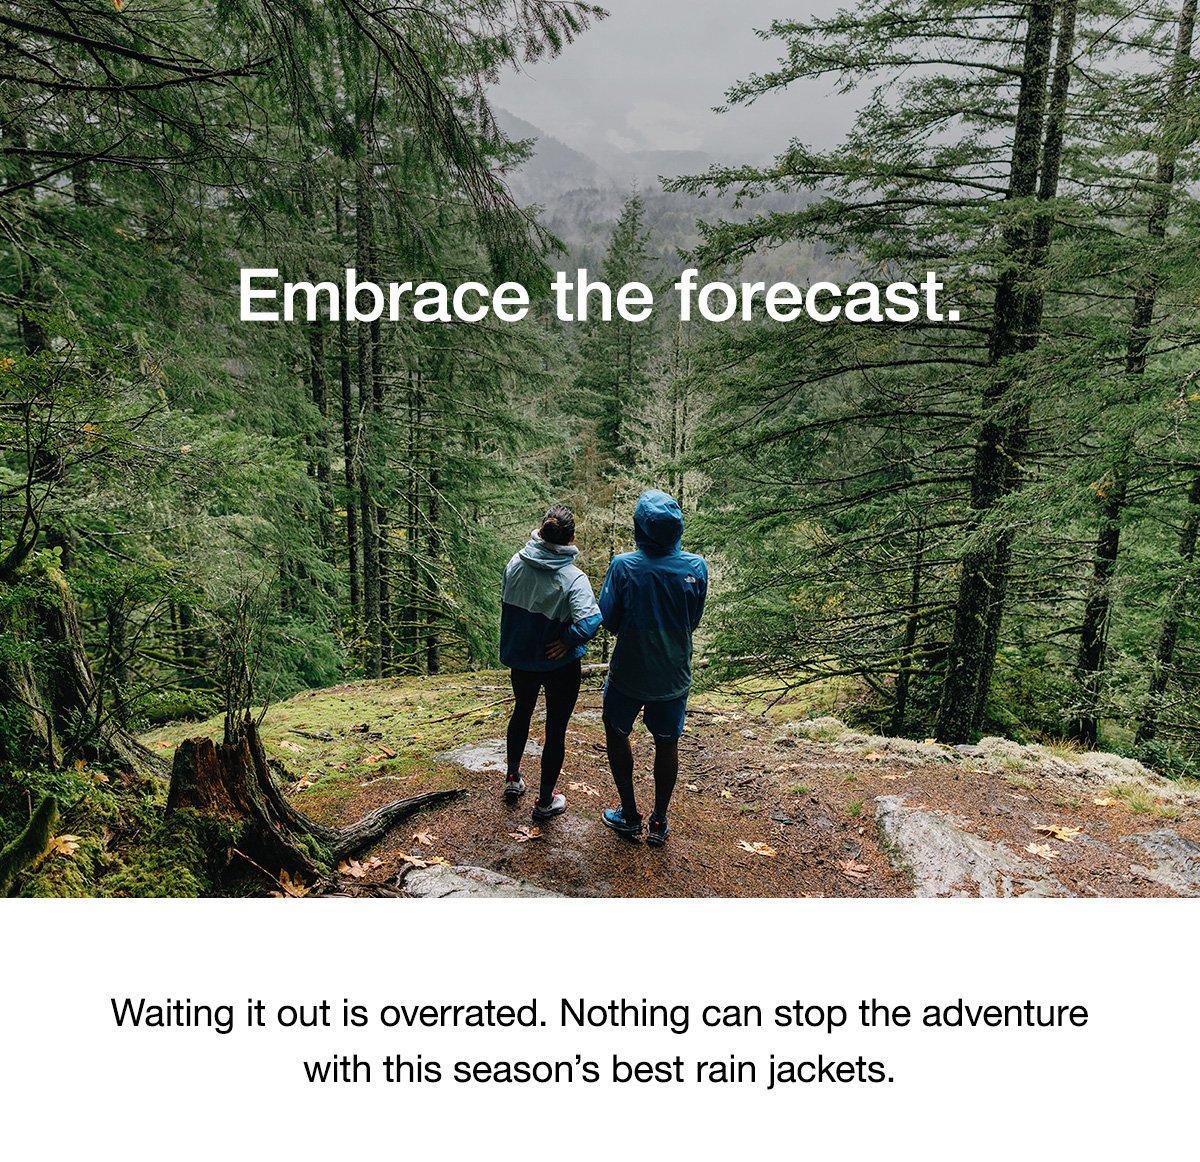 Embrace the forecast. Waiting it out is overrated. Nothing can stop the adventure with this season's best rain jackets.